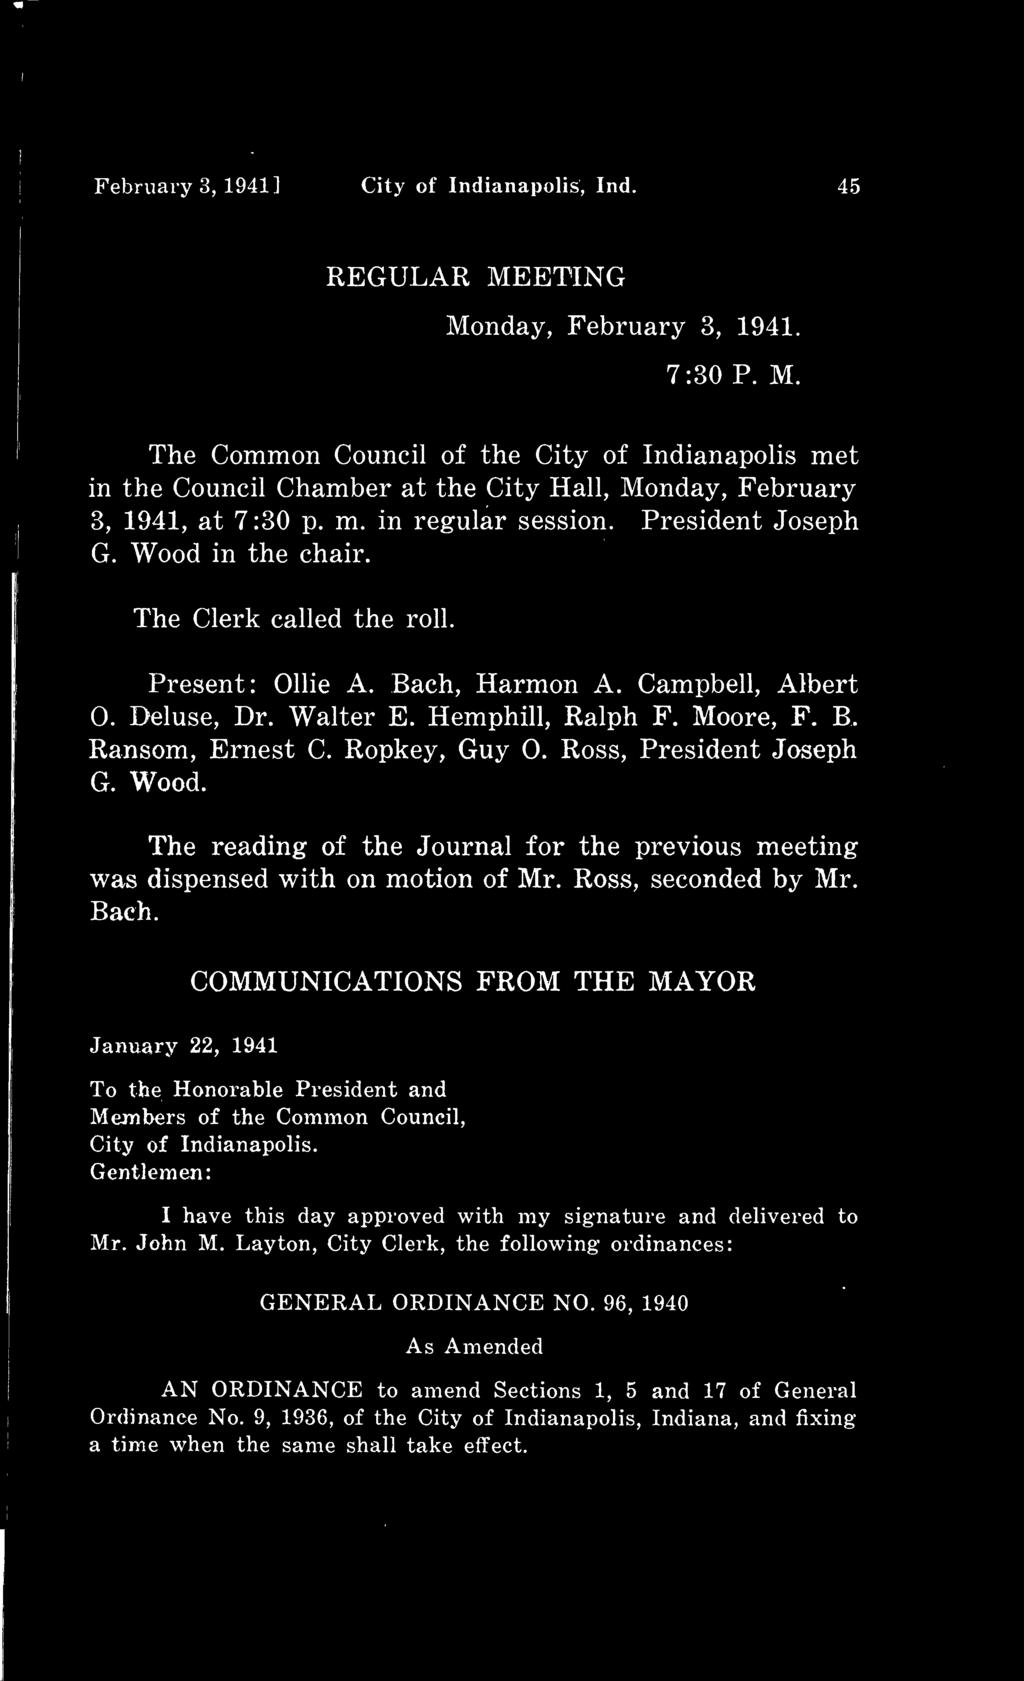 COMMUNICATIONS FROM THE MAYOR January 22, 1941 To the Honorable President and Members of the Common Council, City of Indianapolis.